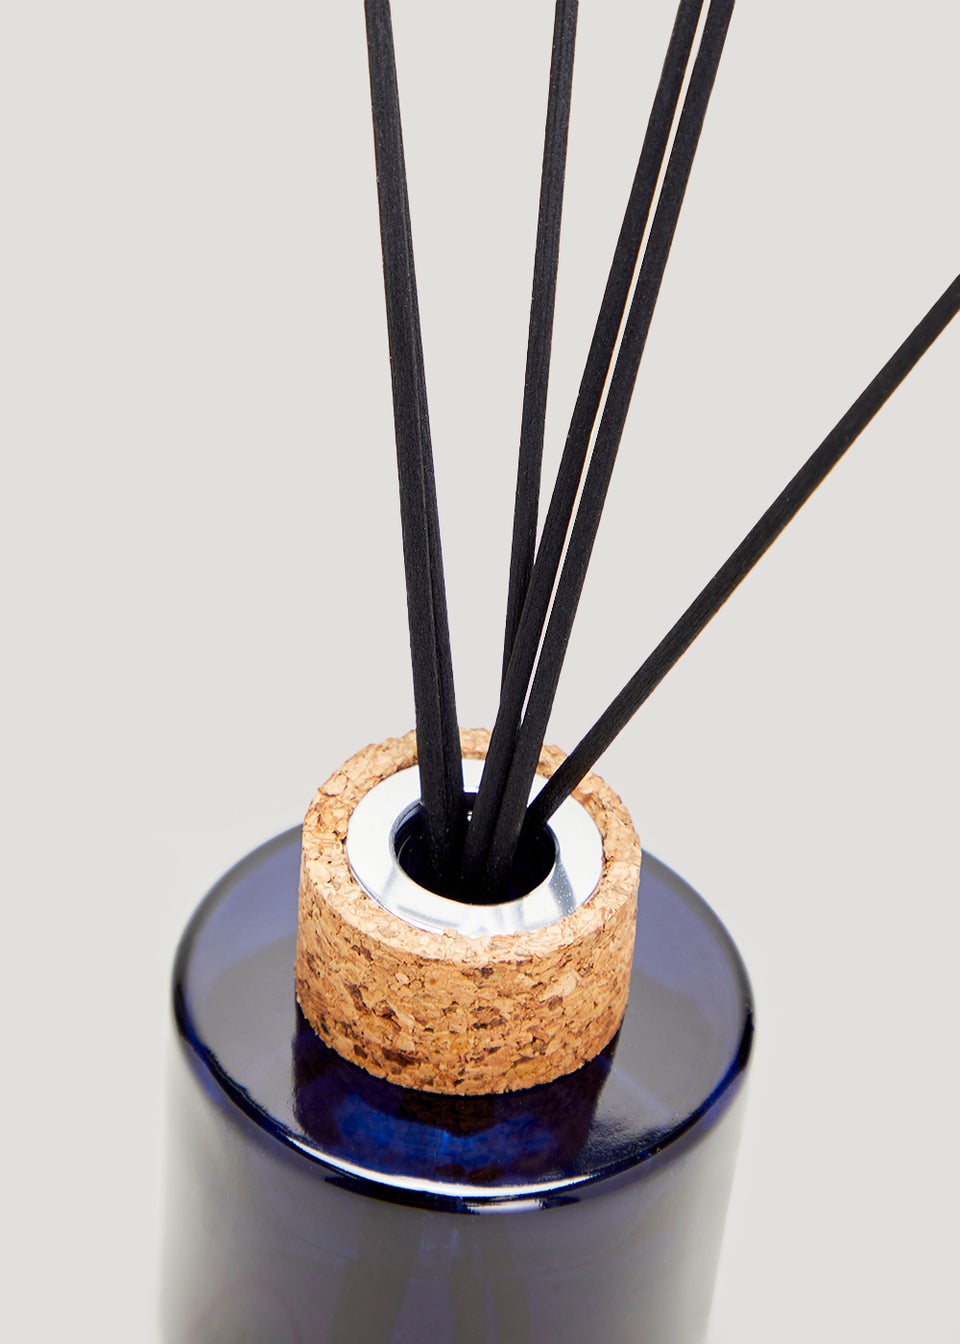 Laundry Day Reed Diffuser (100ml)